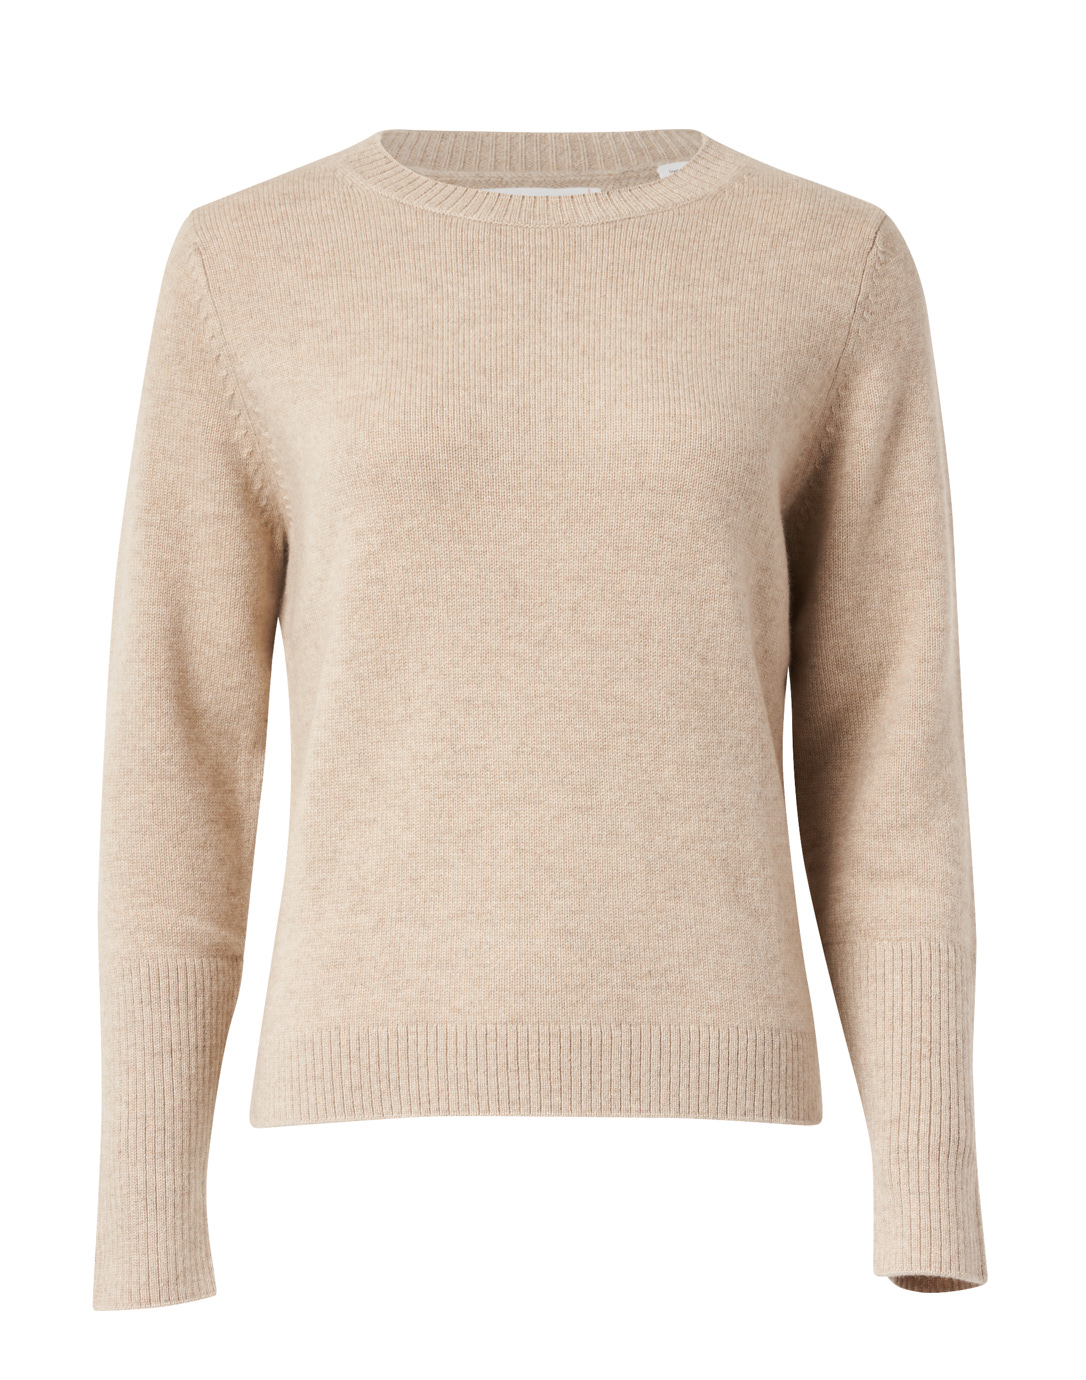 Ontrouw Kosciuszko Informeer Essential Oatmeal Beige Cashmere Sweater | Chinti and Parker